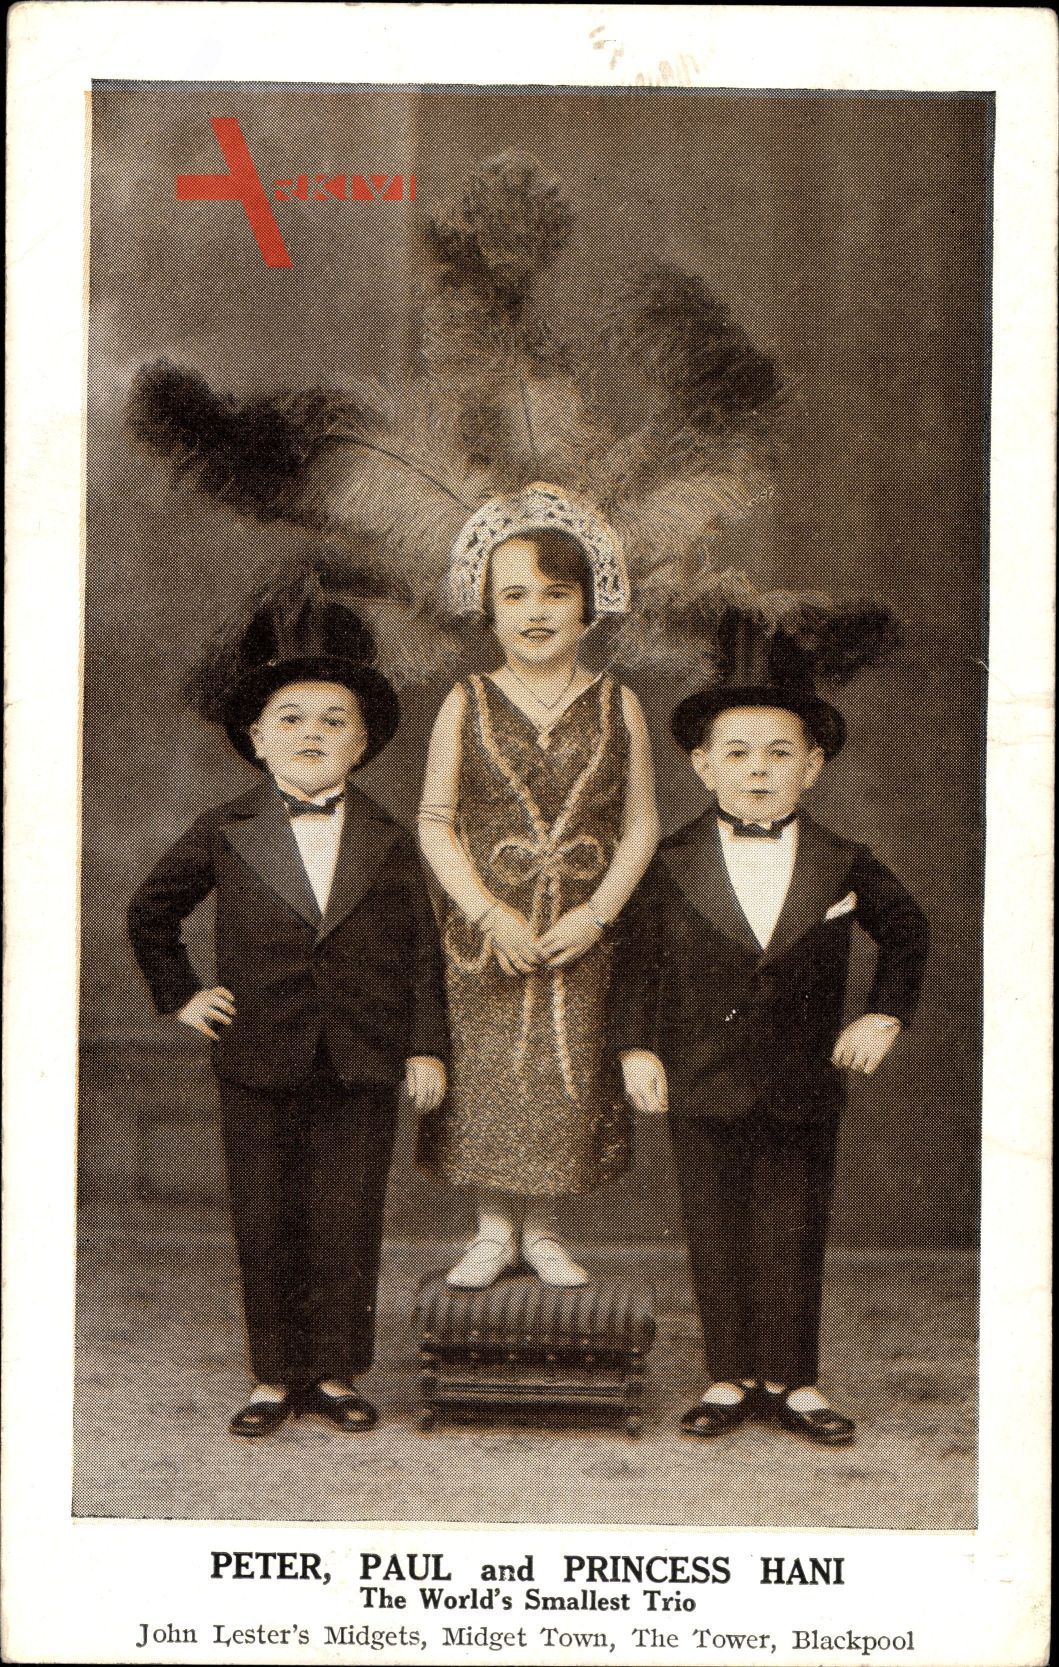 Peter, Paul and Princess Hani, The Worlds Smallest Trio, Liliputaner